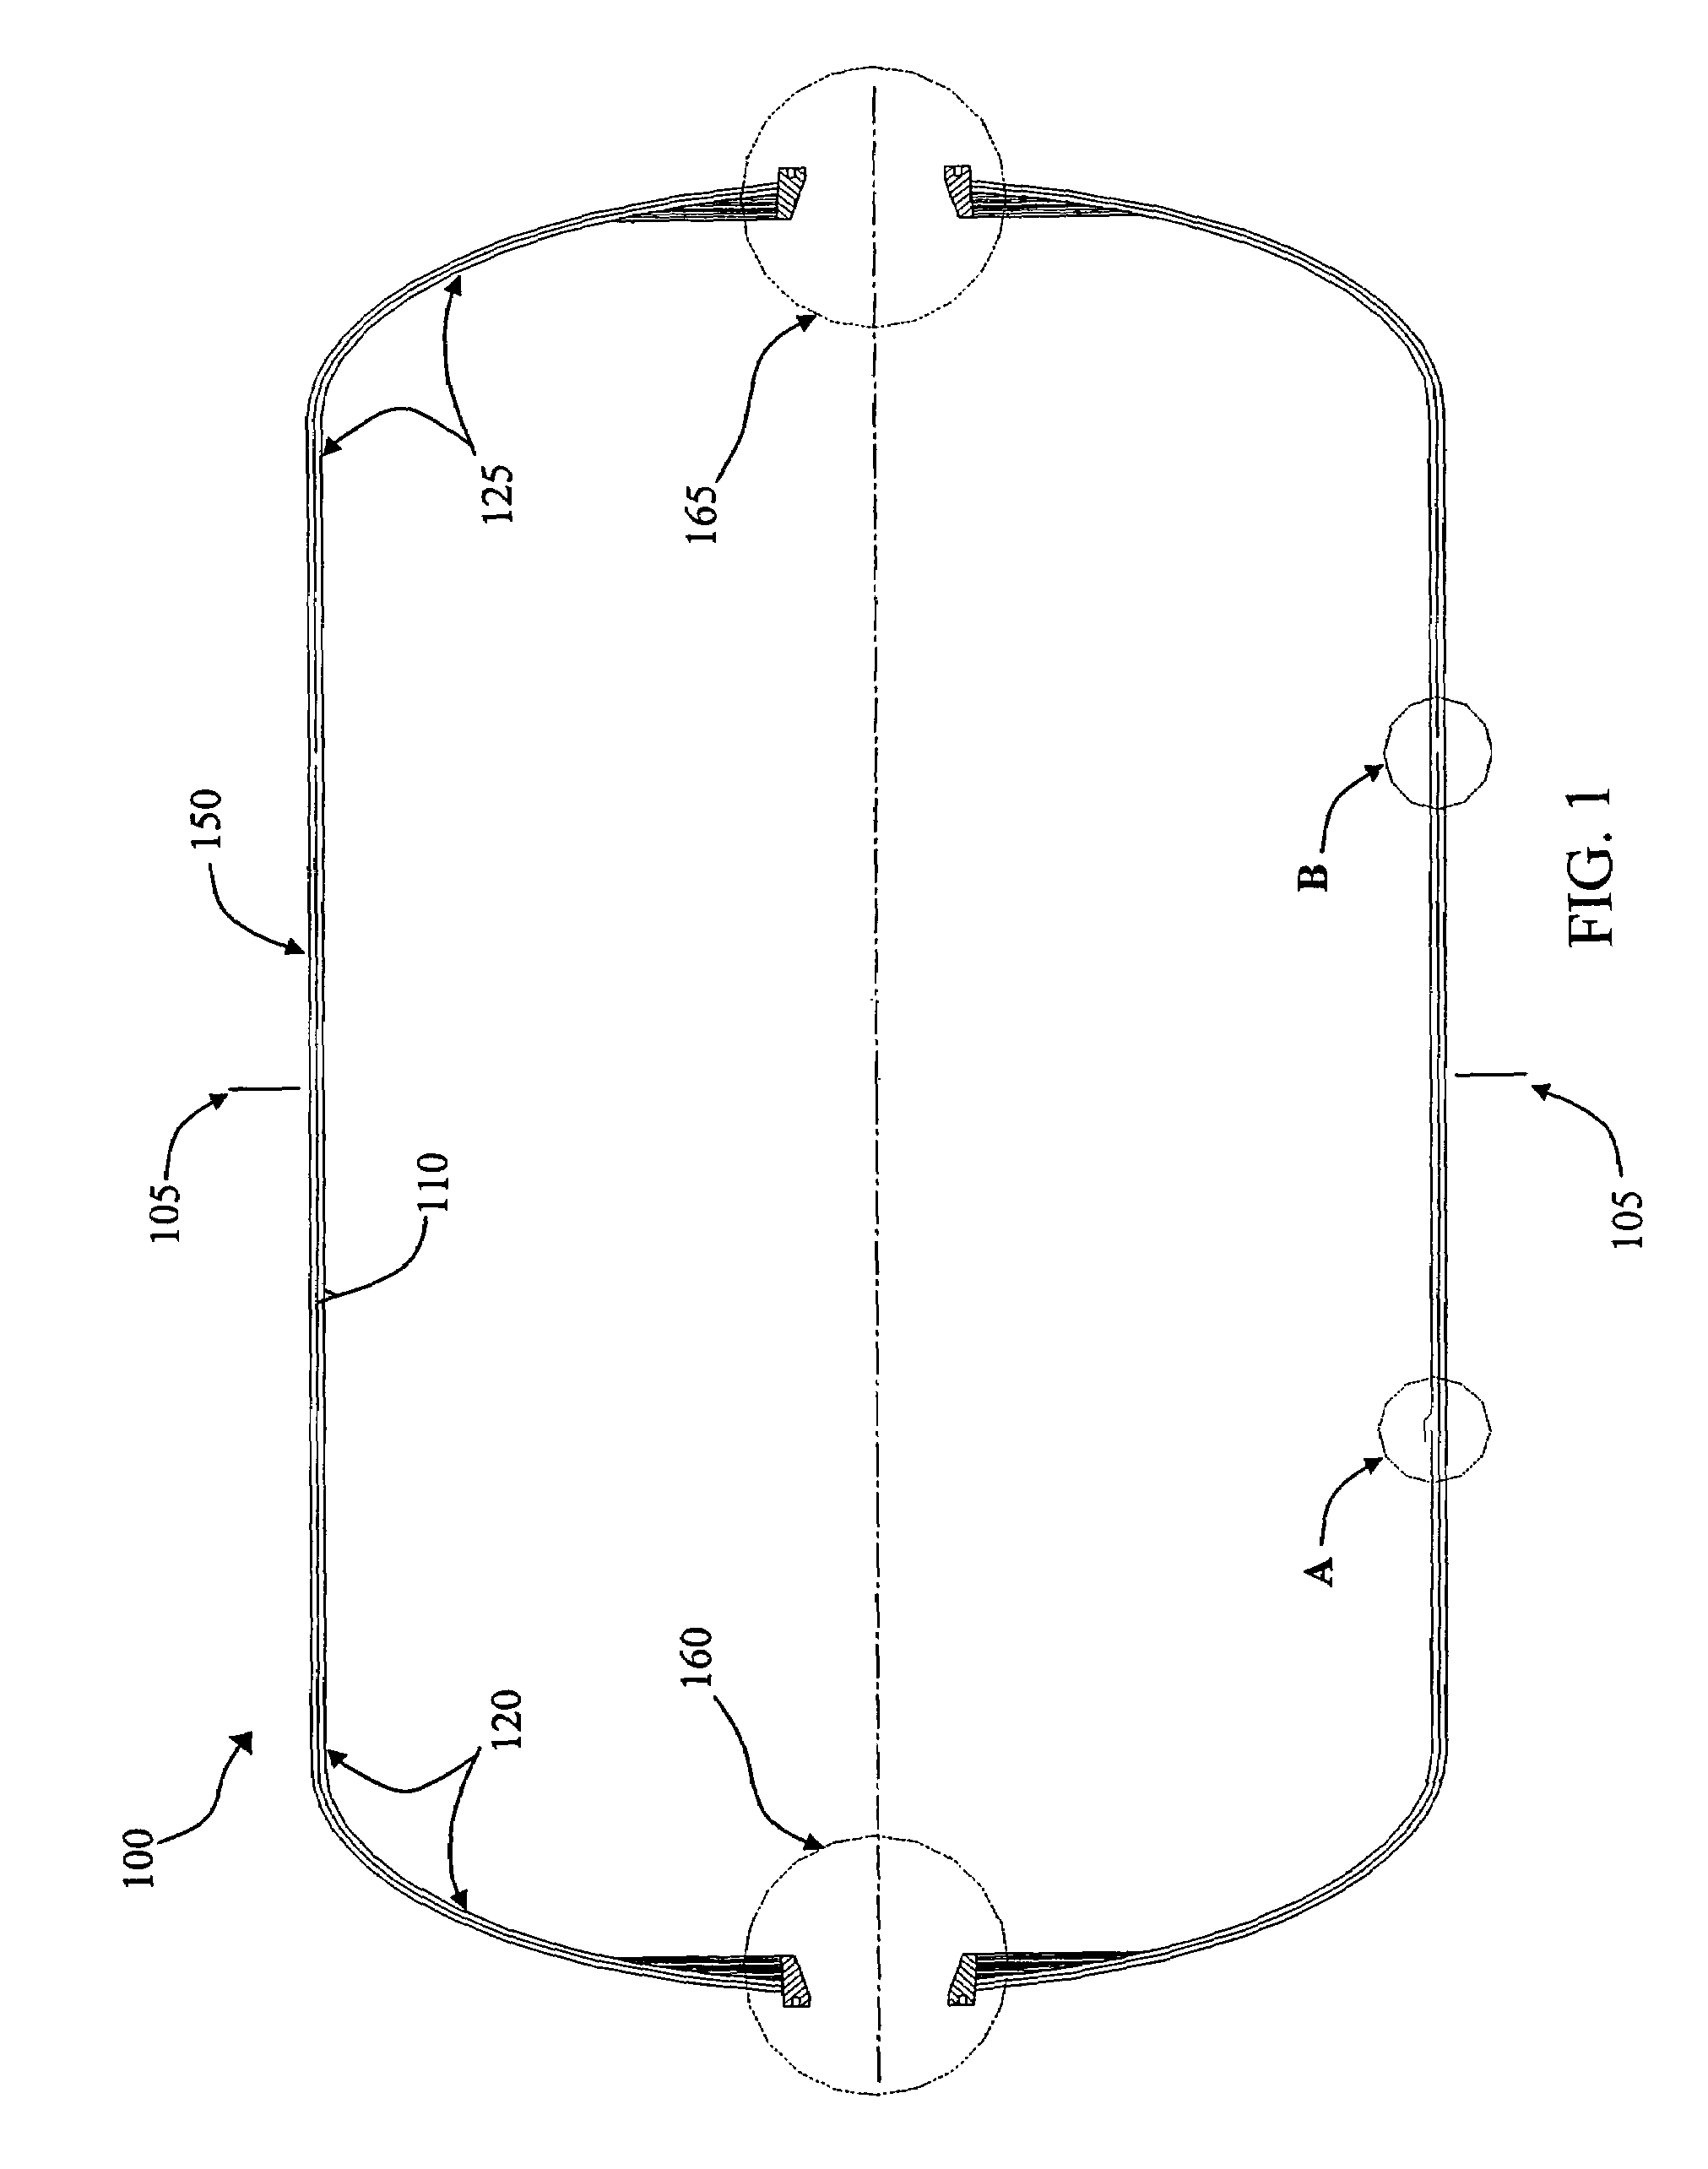 Composite cryogenic propellant tank including an integrated floating compliant liner